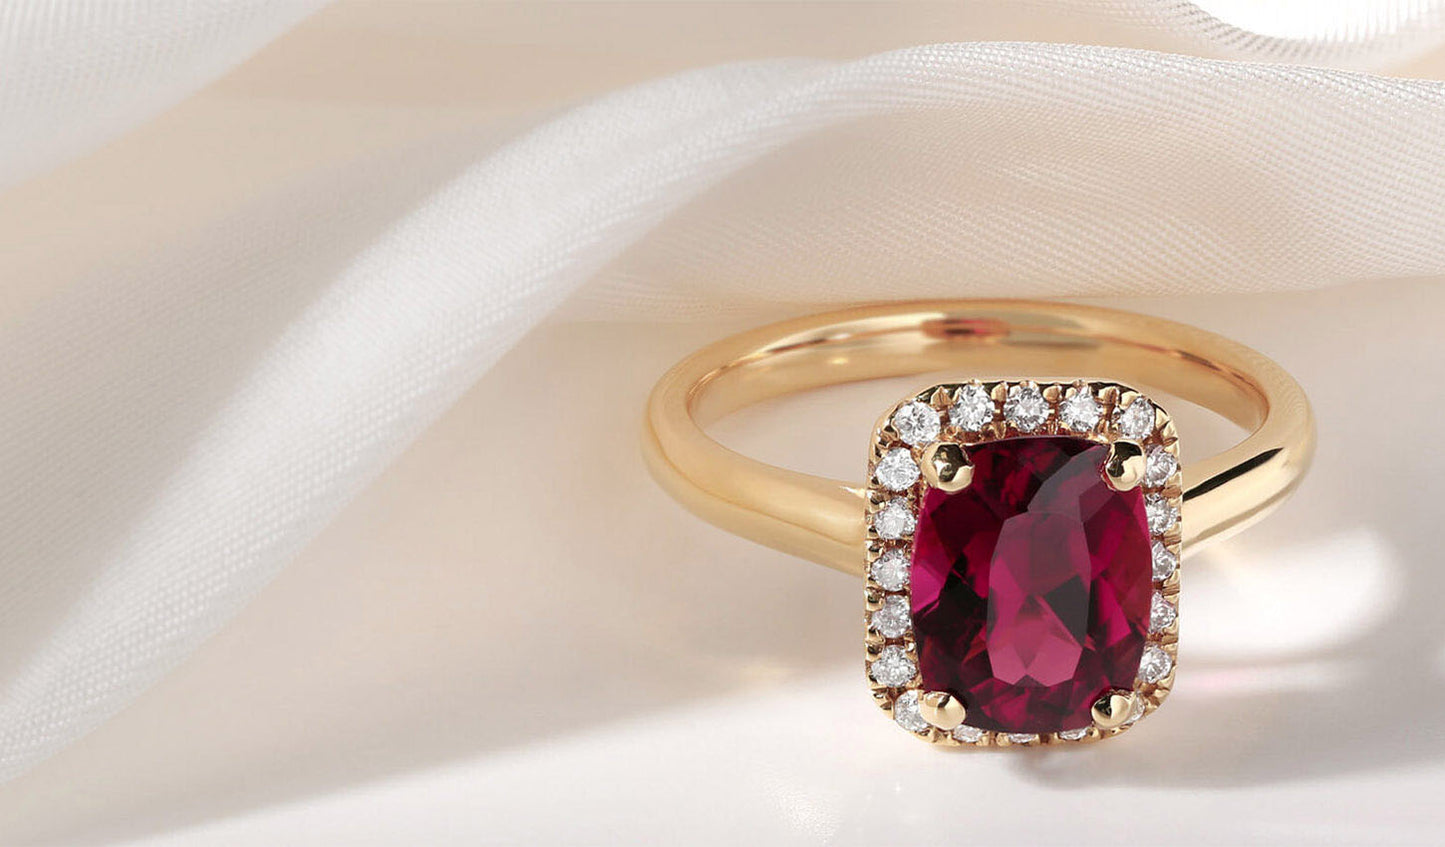 Why Choose Ruby Engagement Rings?